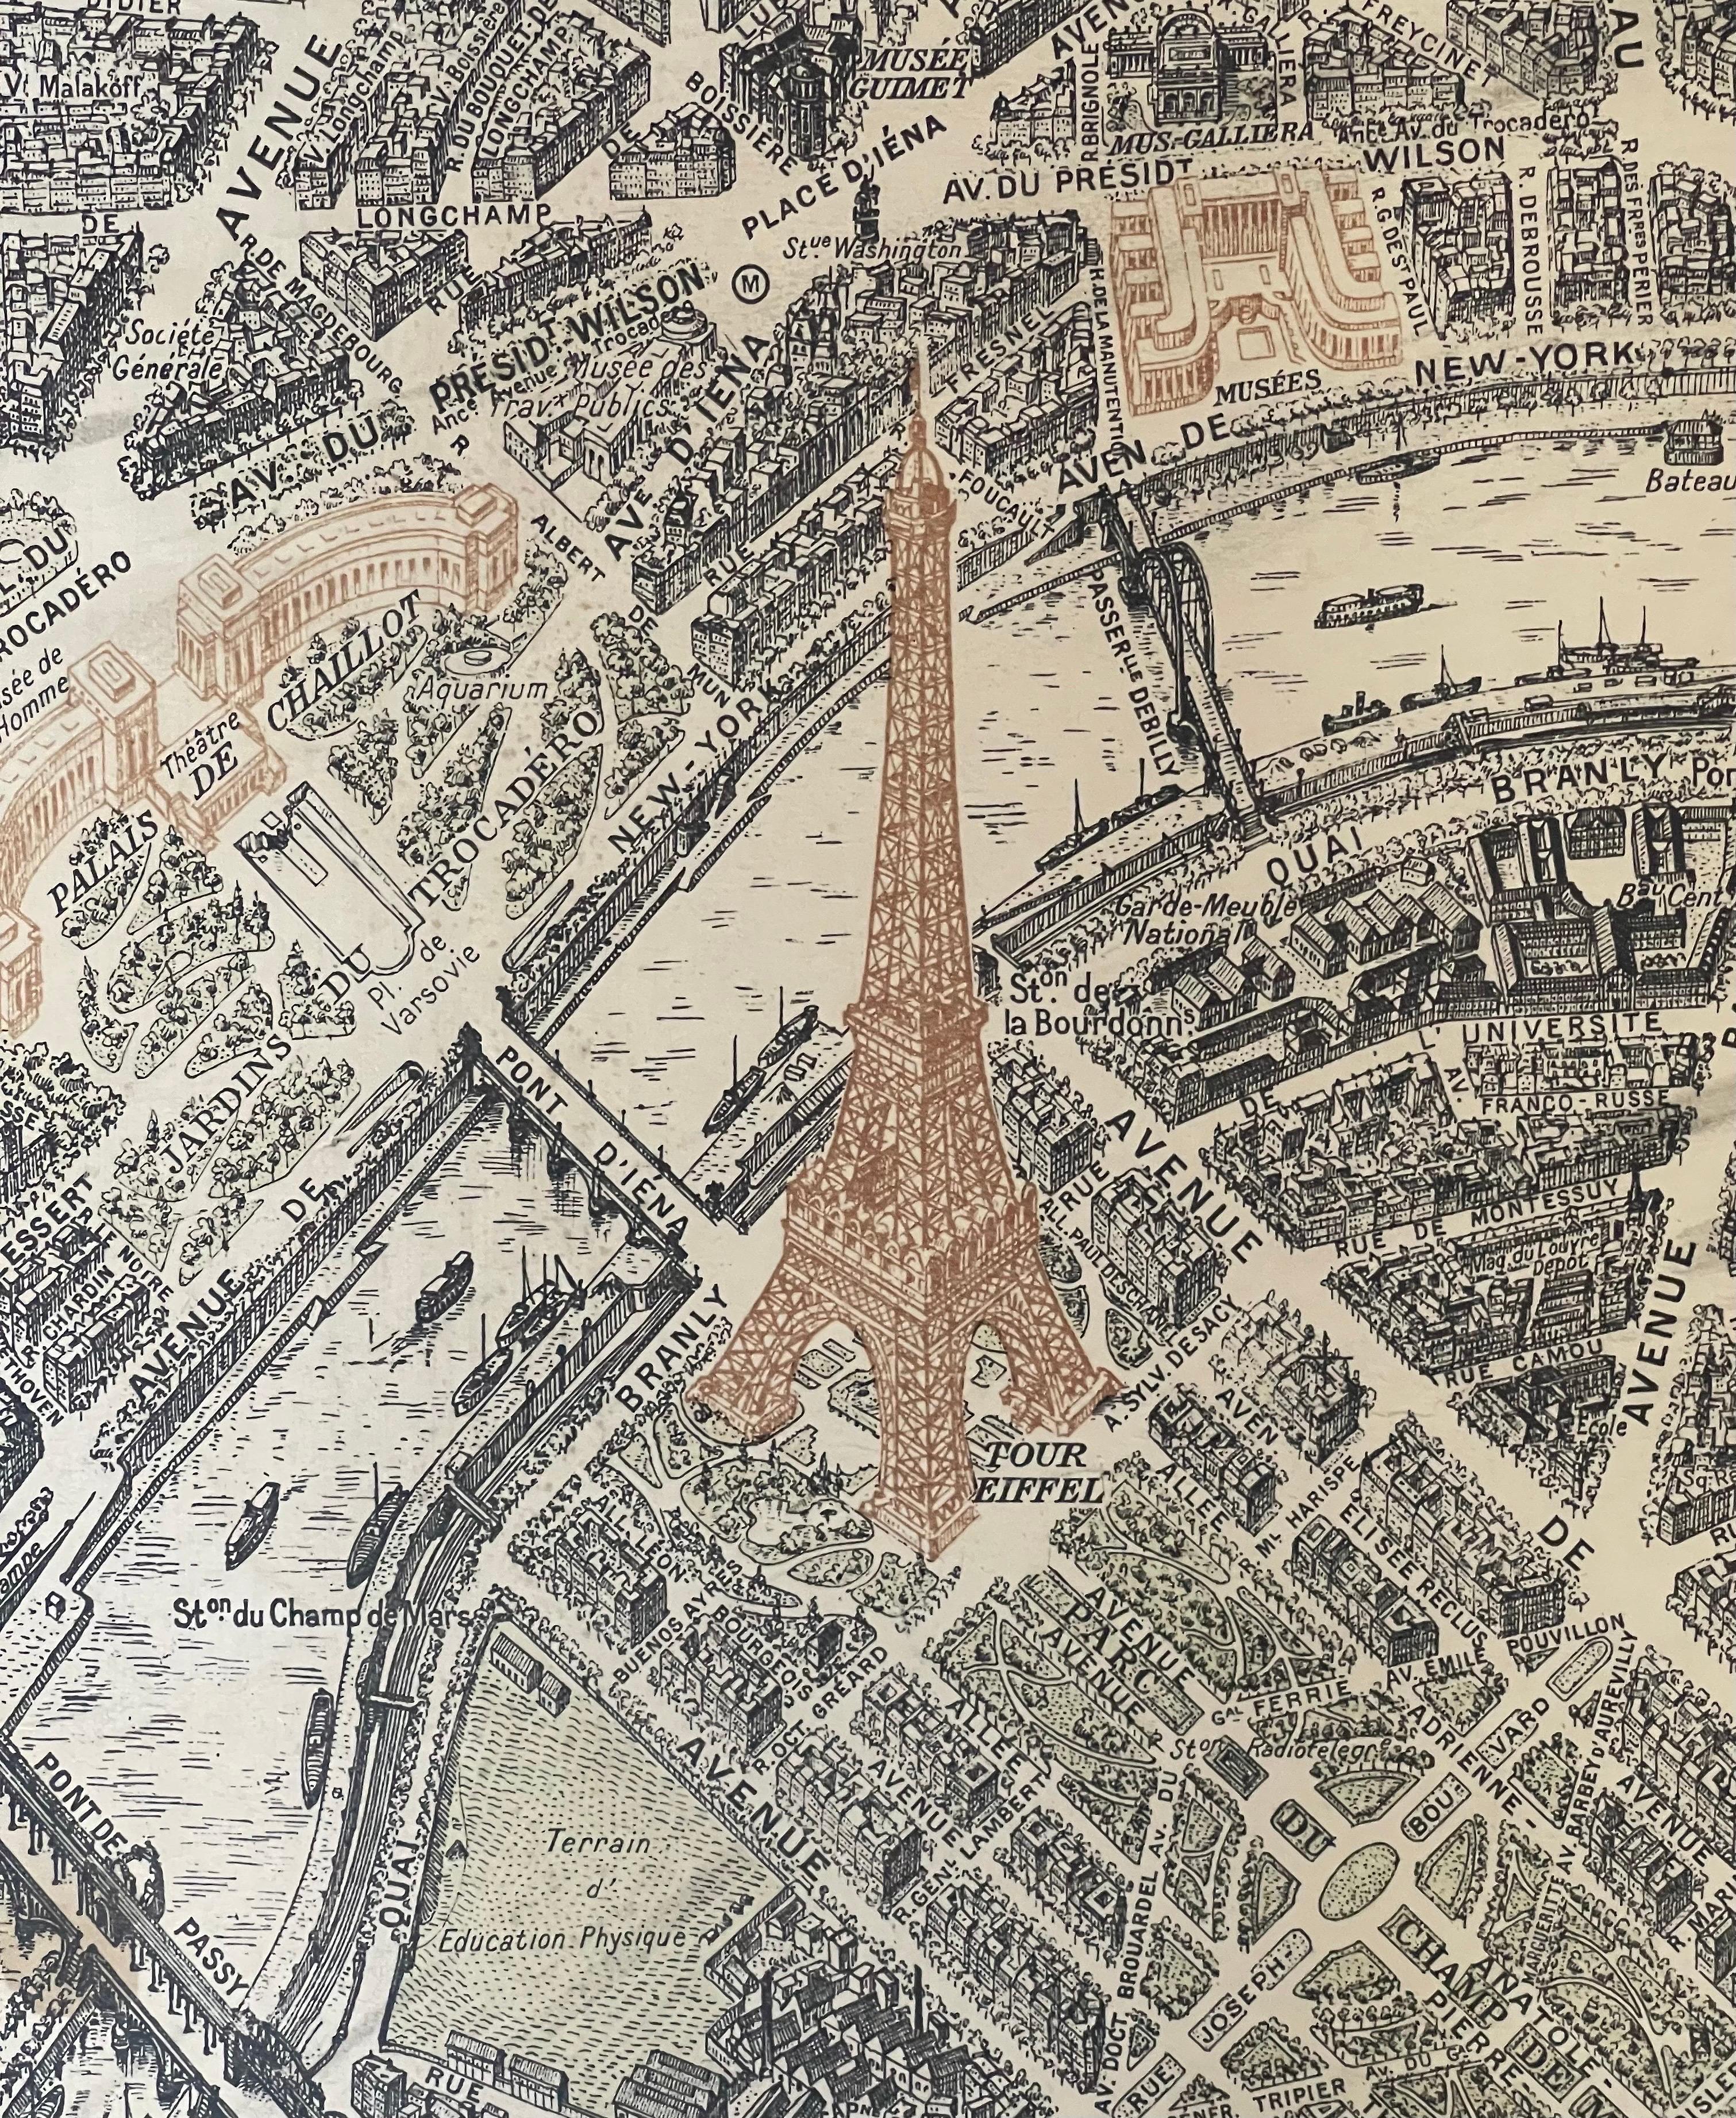 Lithographiekarte „View of the Center of Paris Taken from the Air“ im Angebot 7